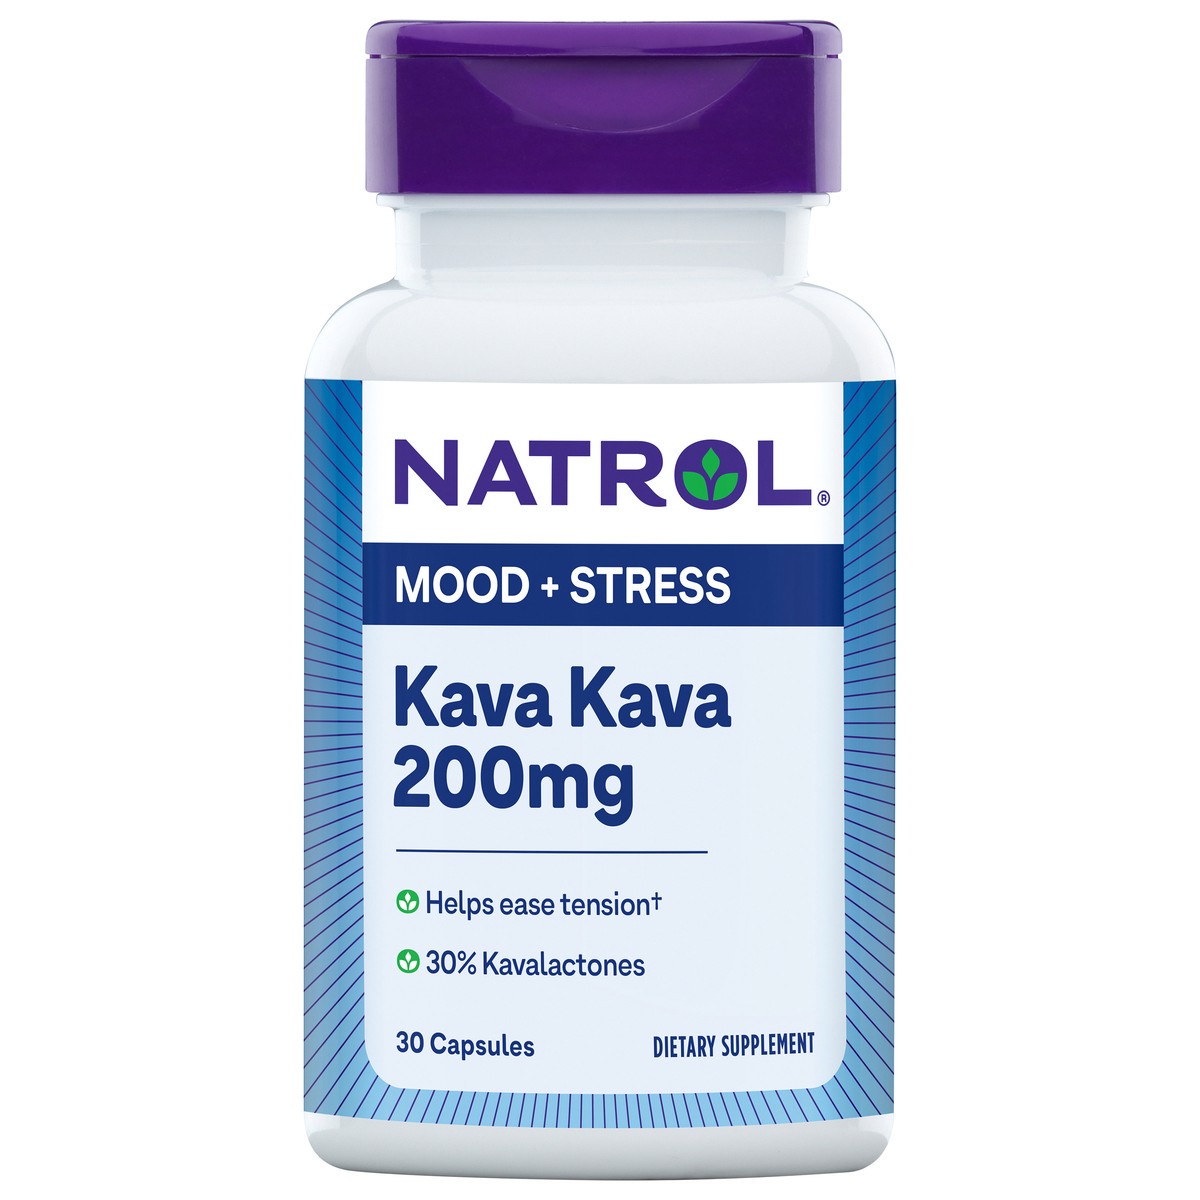 slide 5 of 8, Natrol Mood & Stress Kava Kava 200mg, Dietary Supplement for Relaxation and Eases Tension, 30 Capsules, 15-30 Day Supply, 30 ct